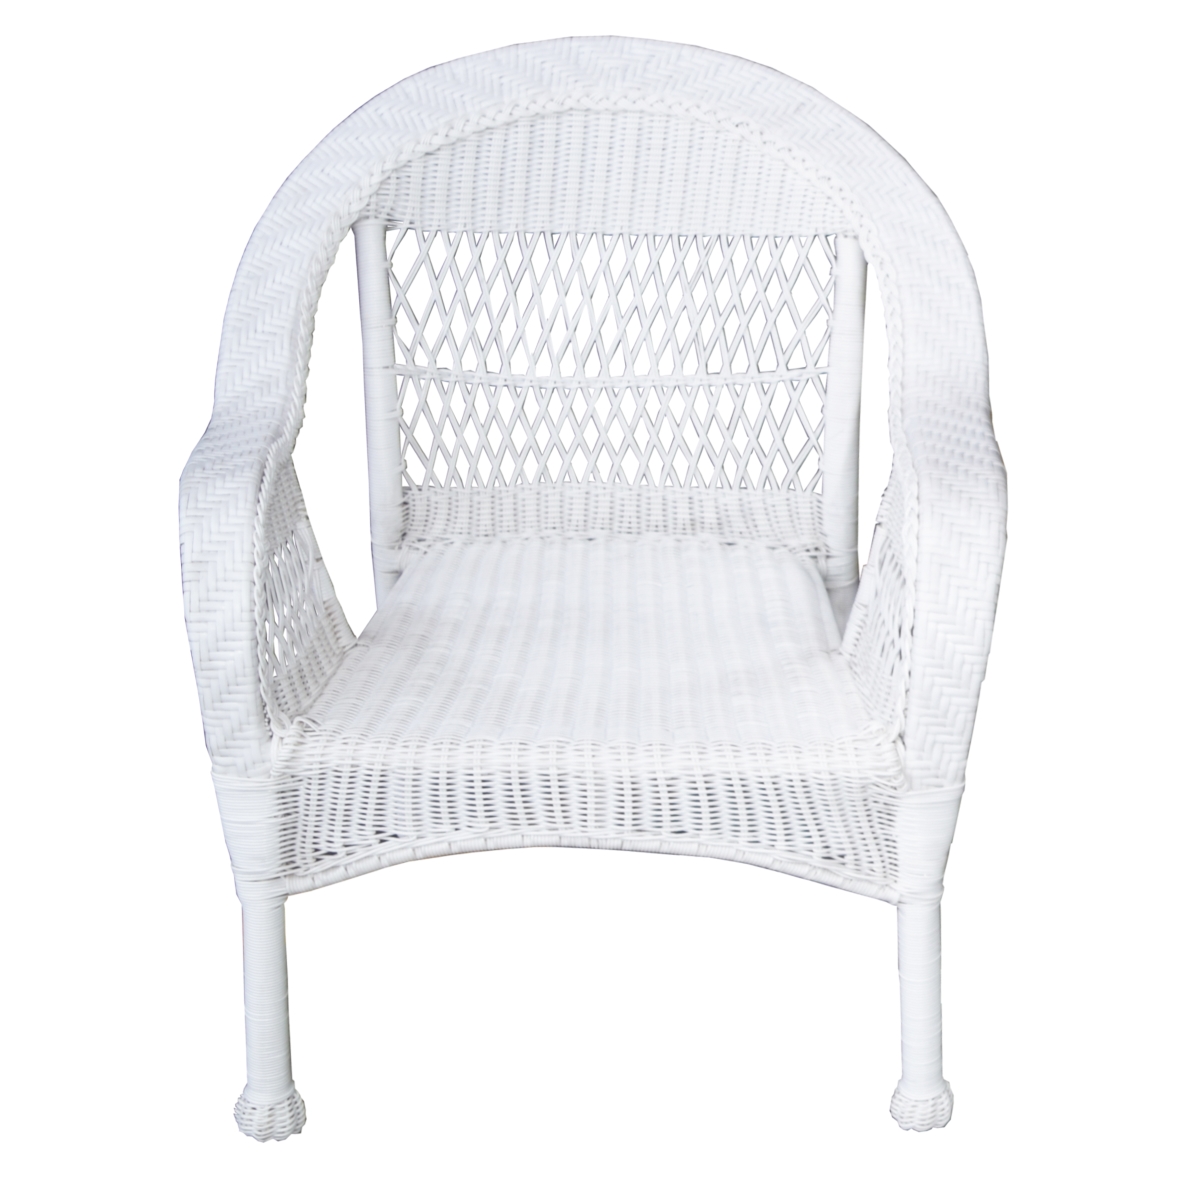 Oakland Living 9999-chair-wt Traditional Outdoor & Indoor Stackable All Weather Resin Wicker Patio Chair With Aluminum Frame, White